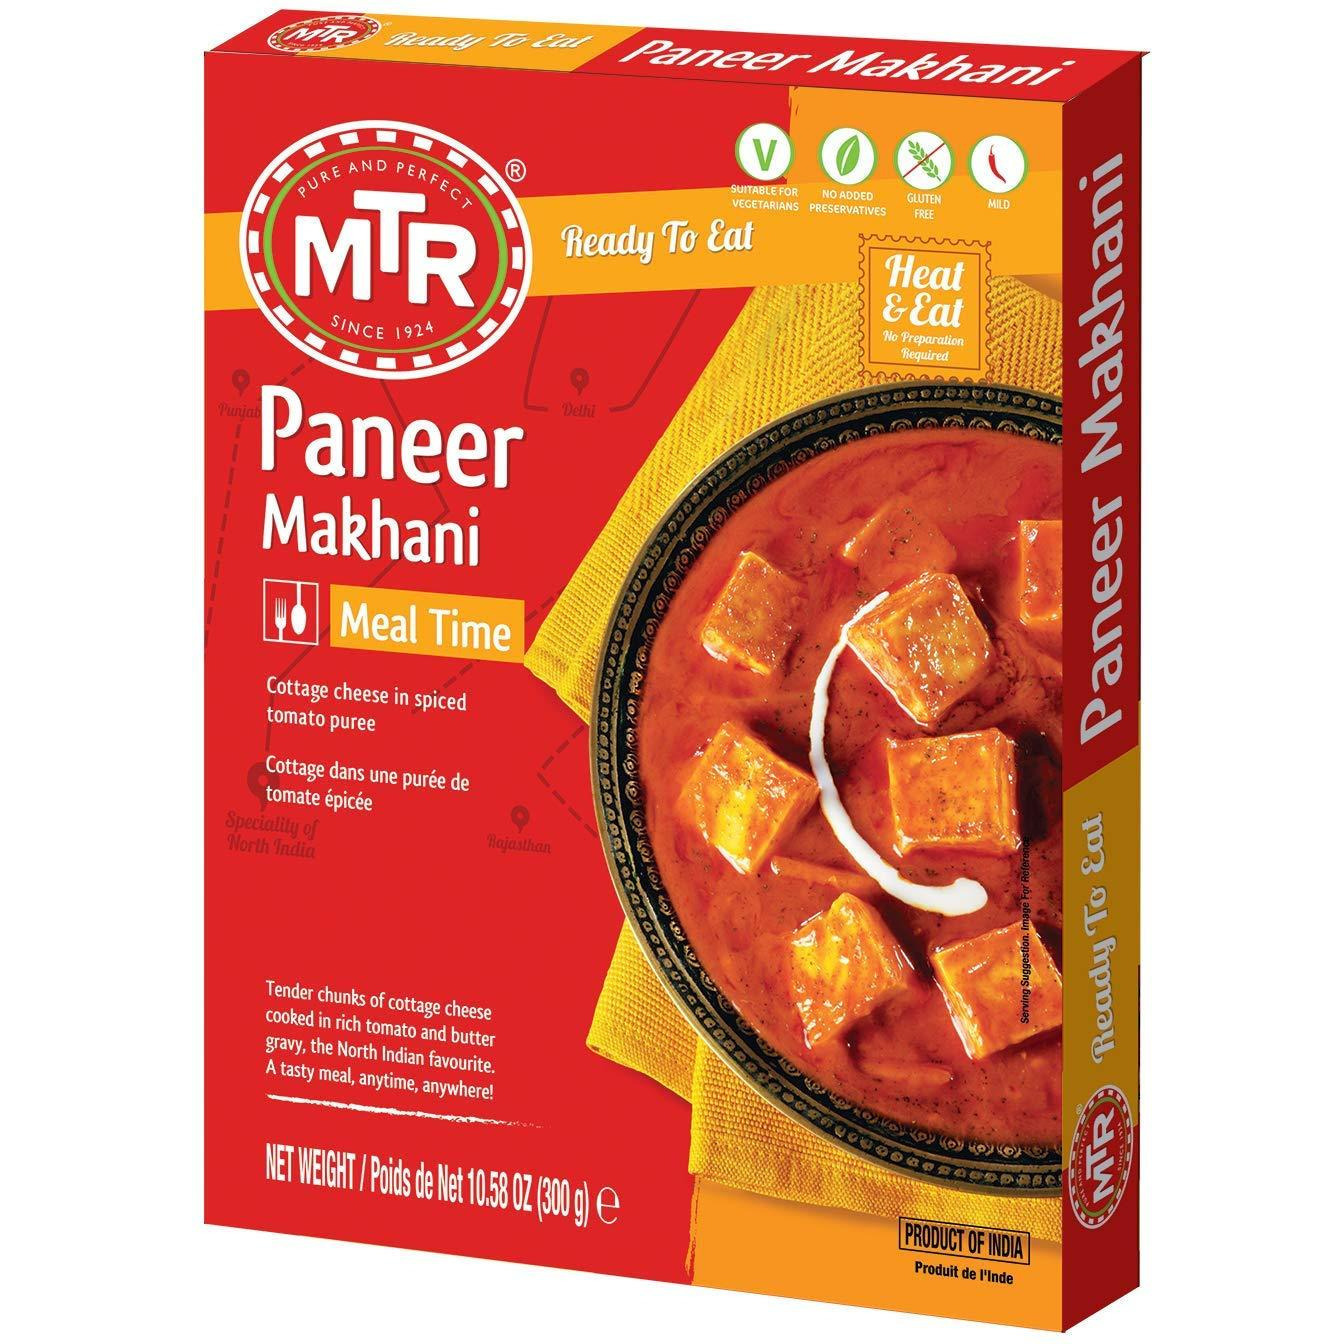 Pack of 2 - Mtr Ready To Eat Paneer Makhani - 300 Gm (10.5 Oz)